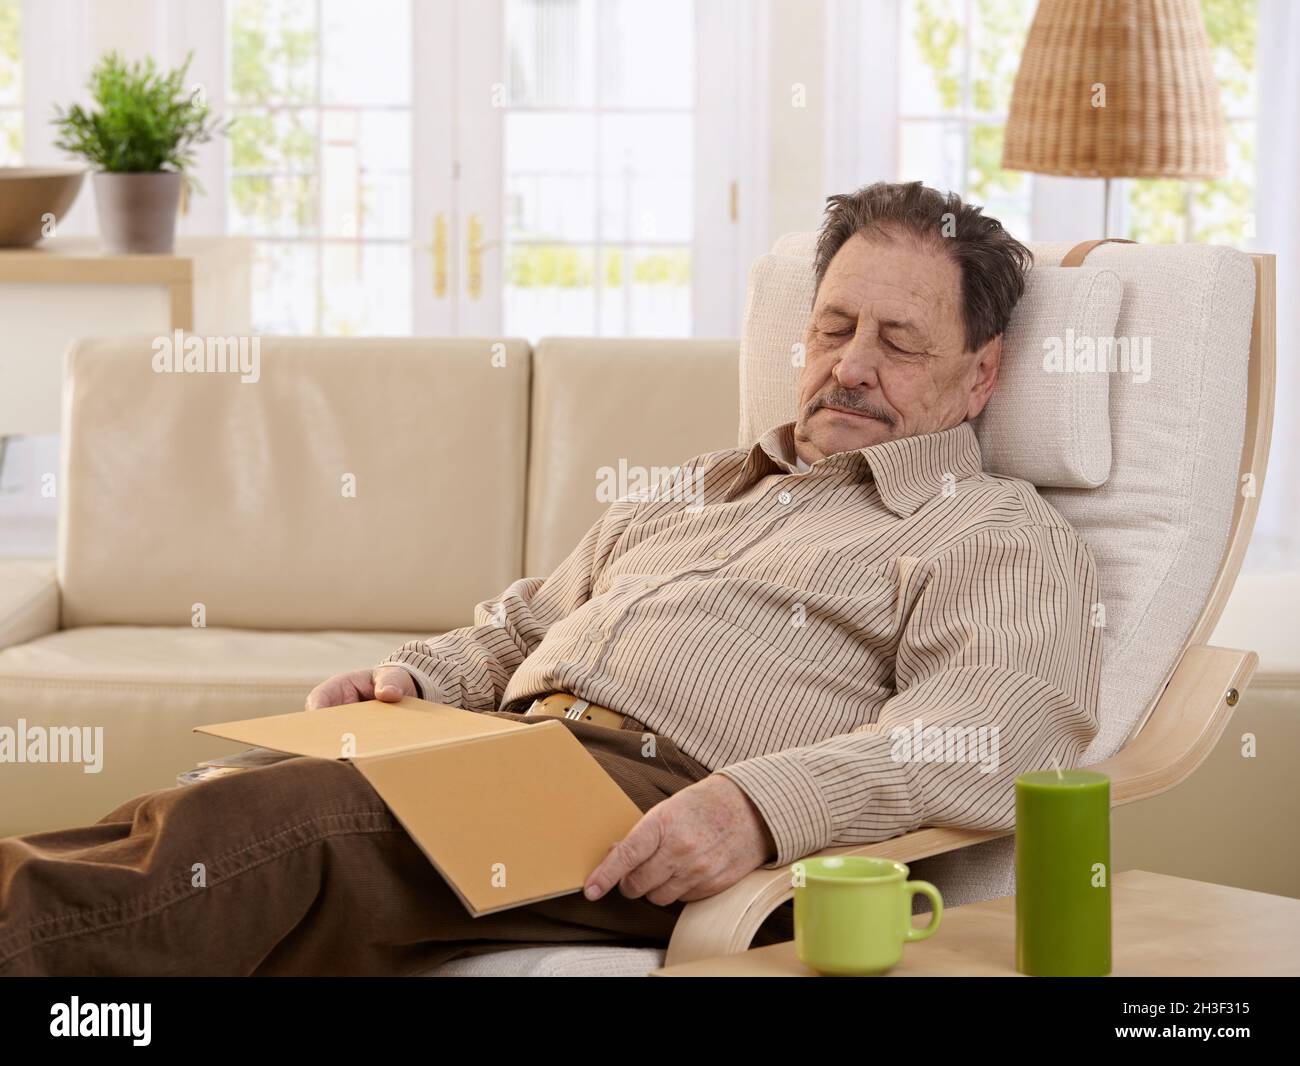 Senior man sleeping in armchair Banque D'Images